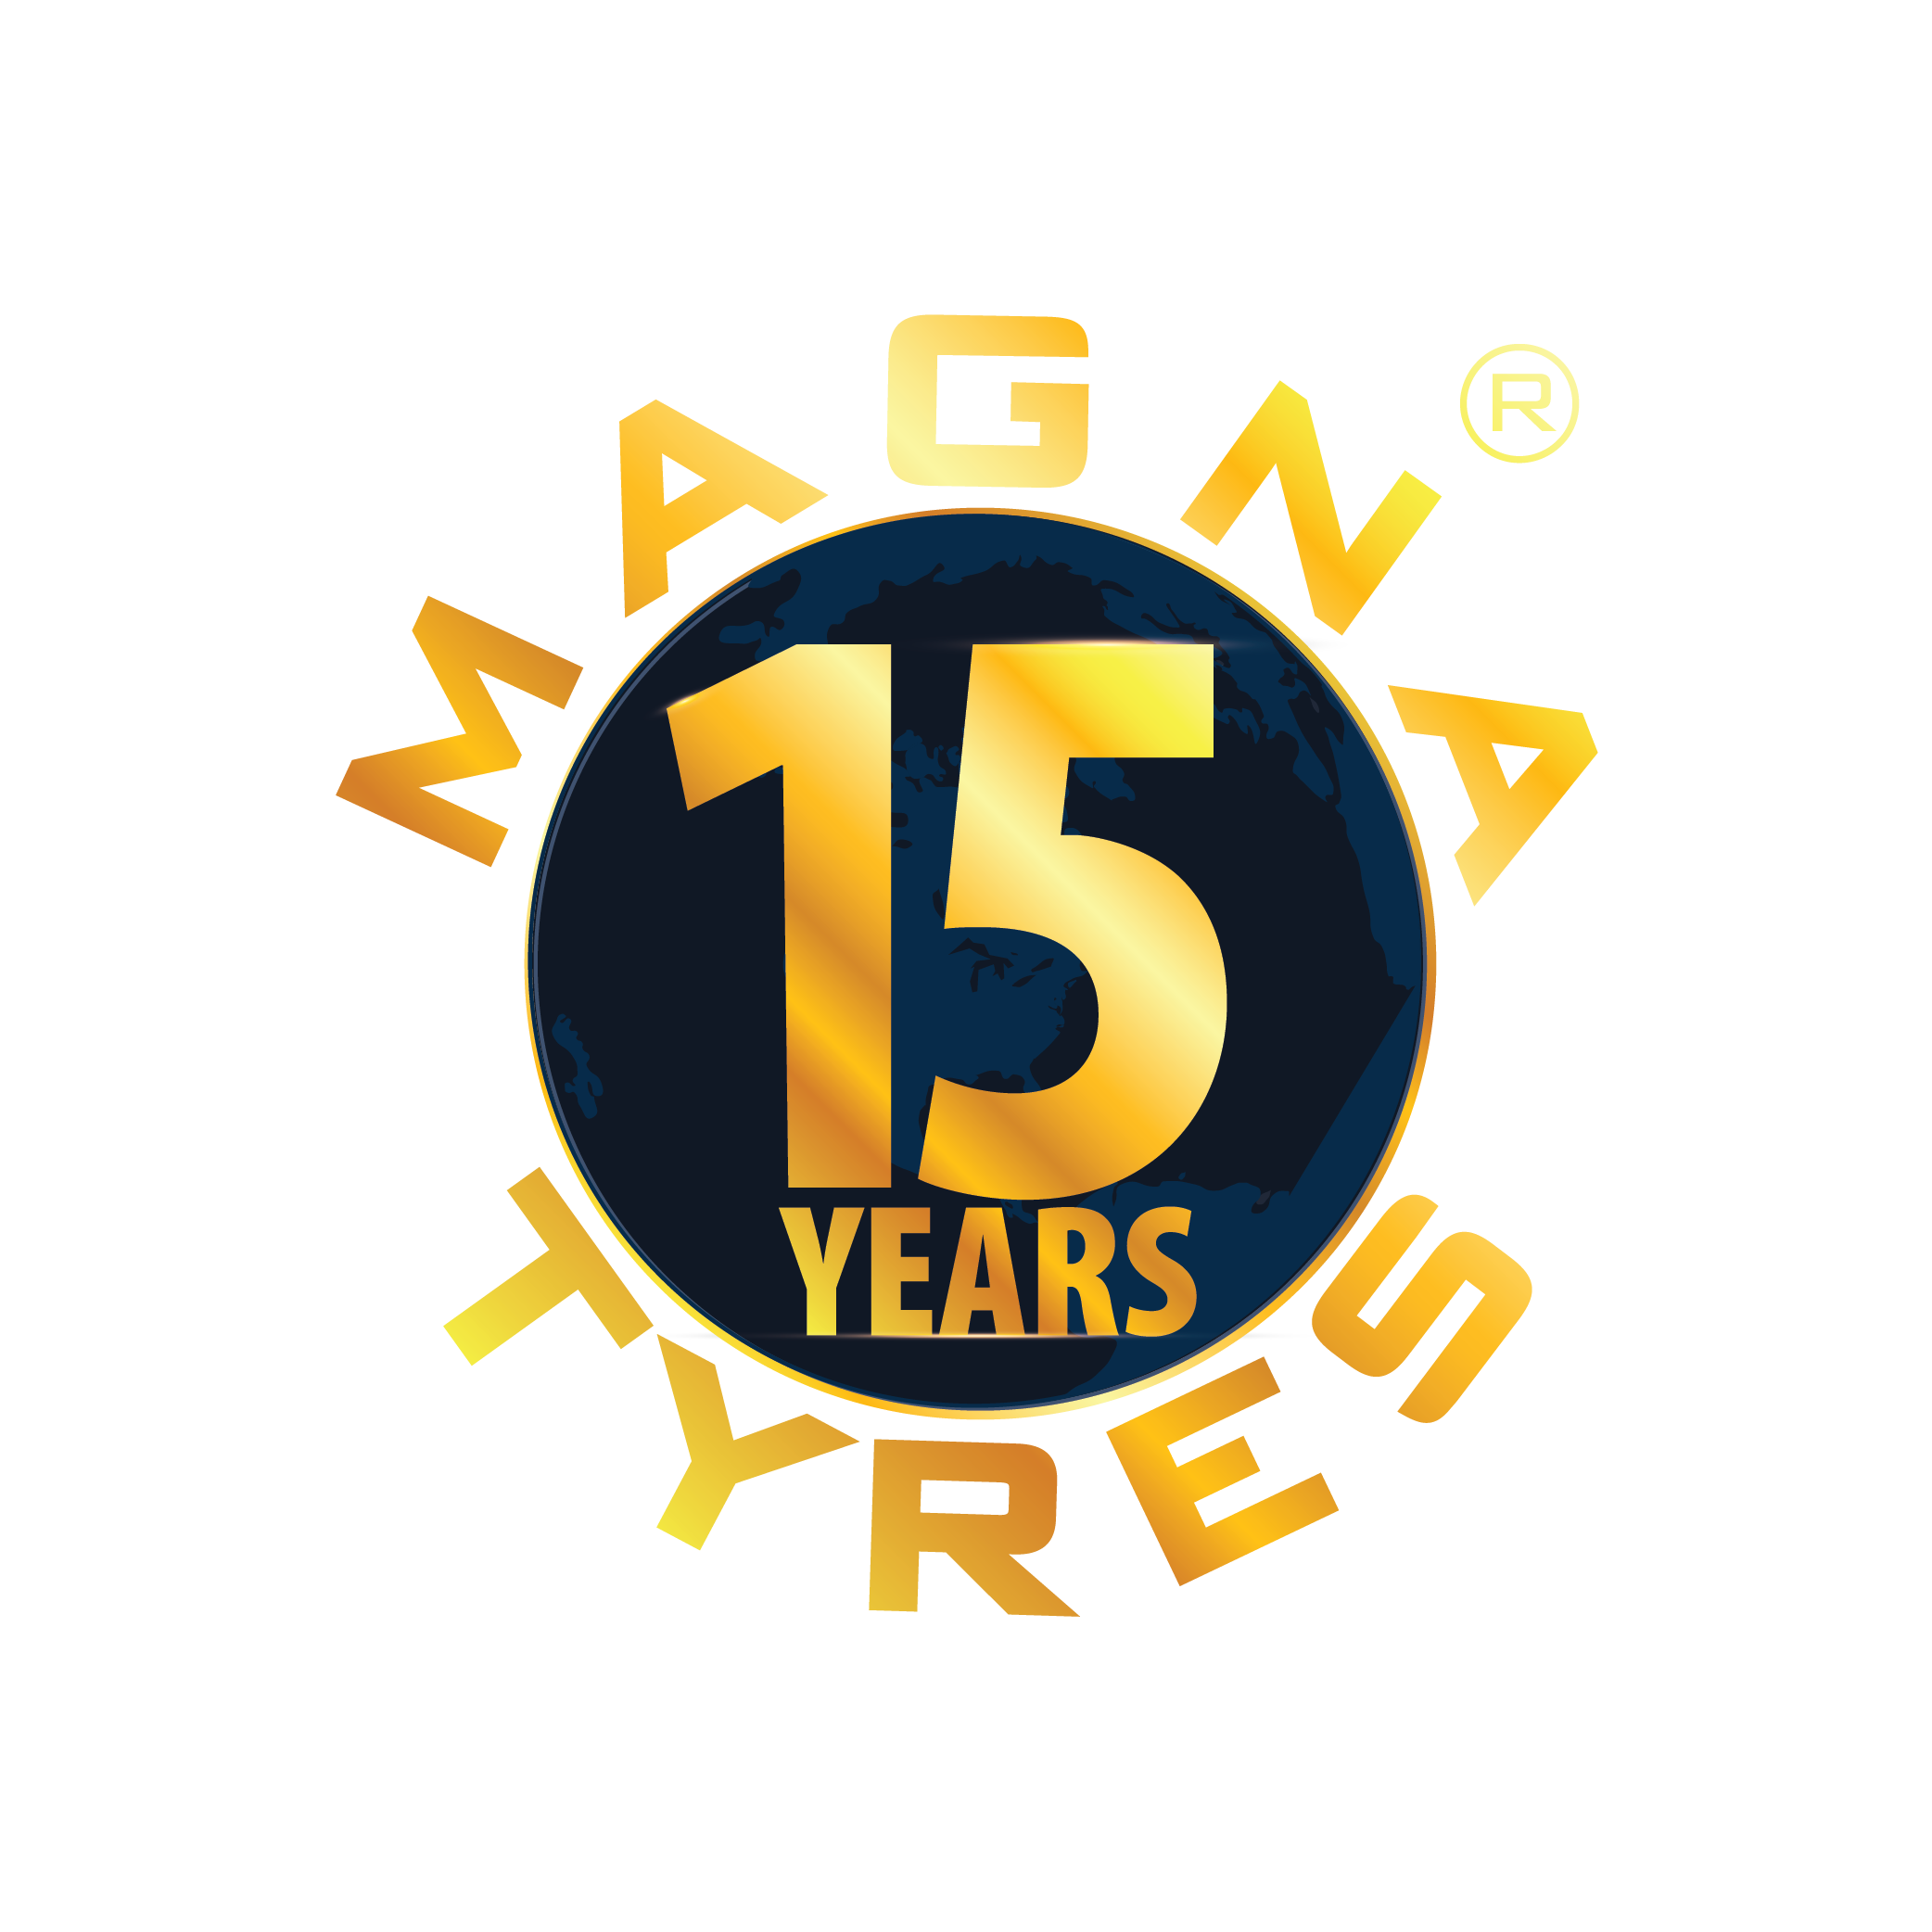 Magna Tyres Group celebrates 15th anniversary